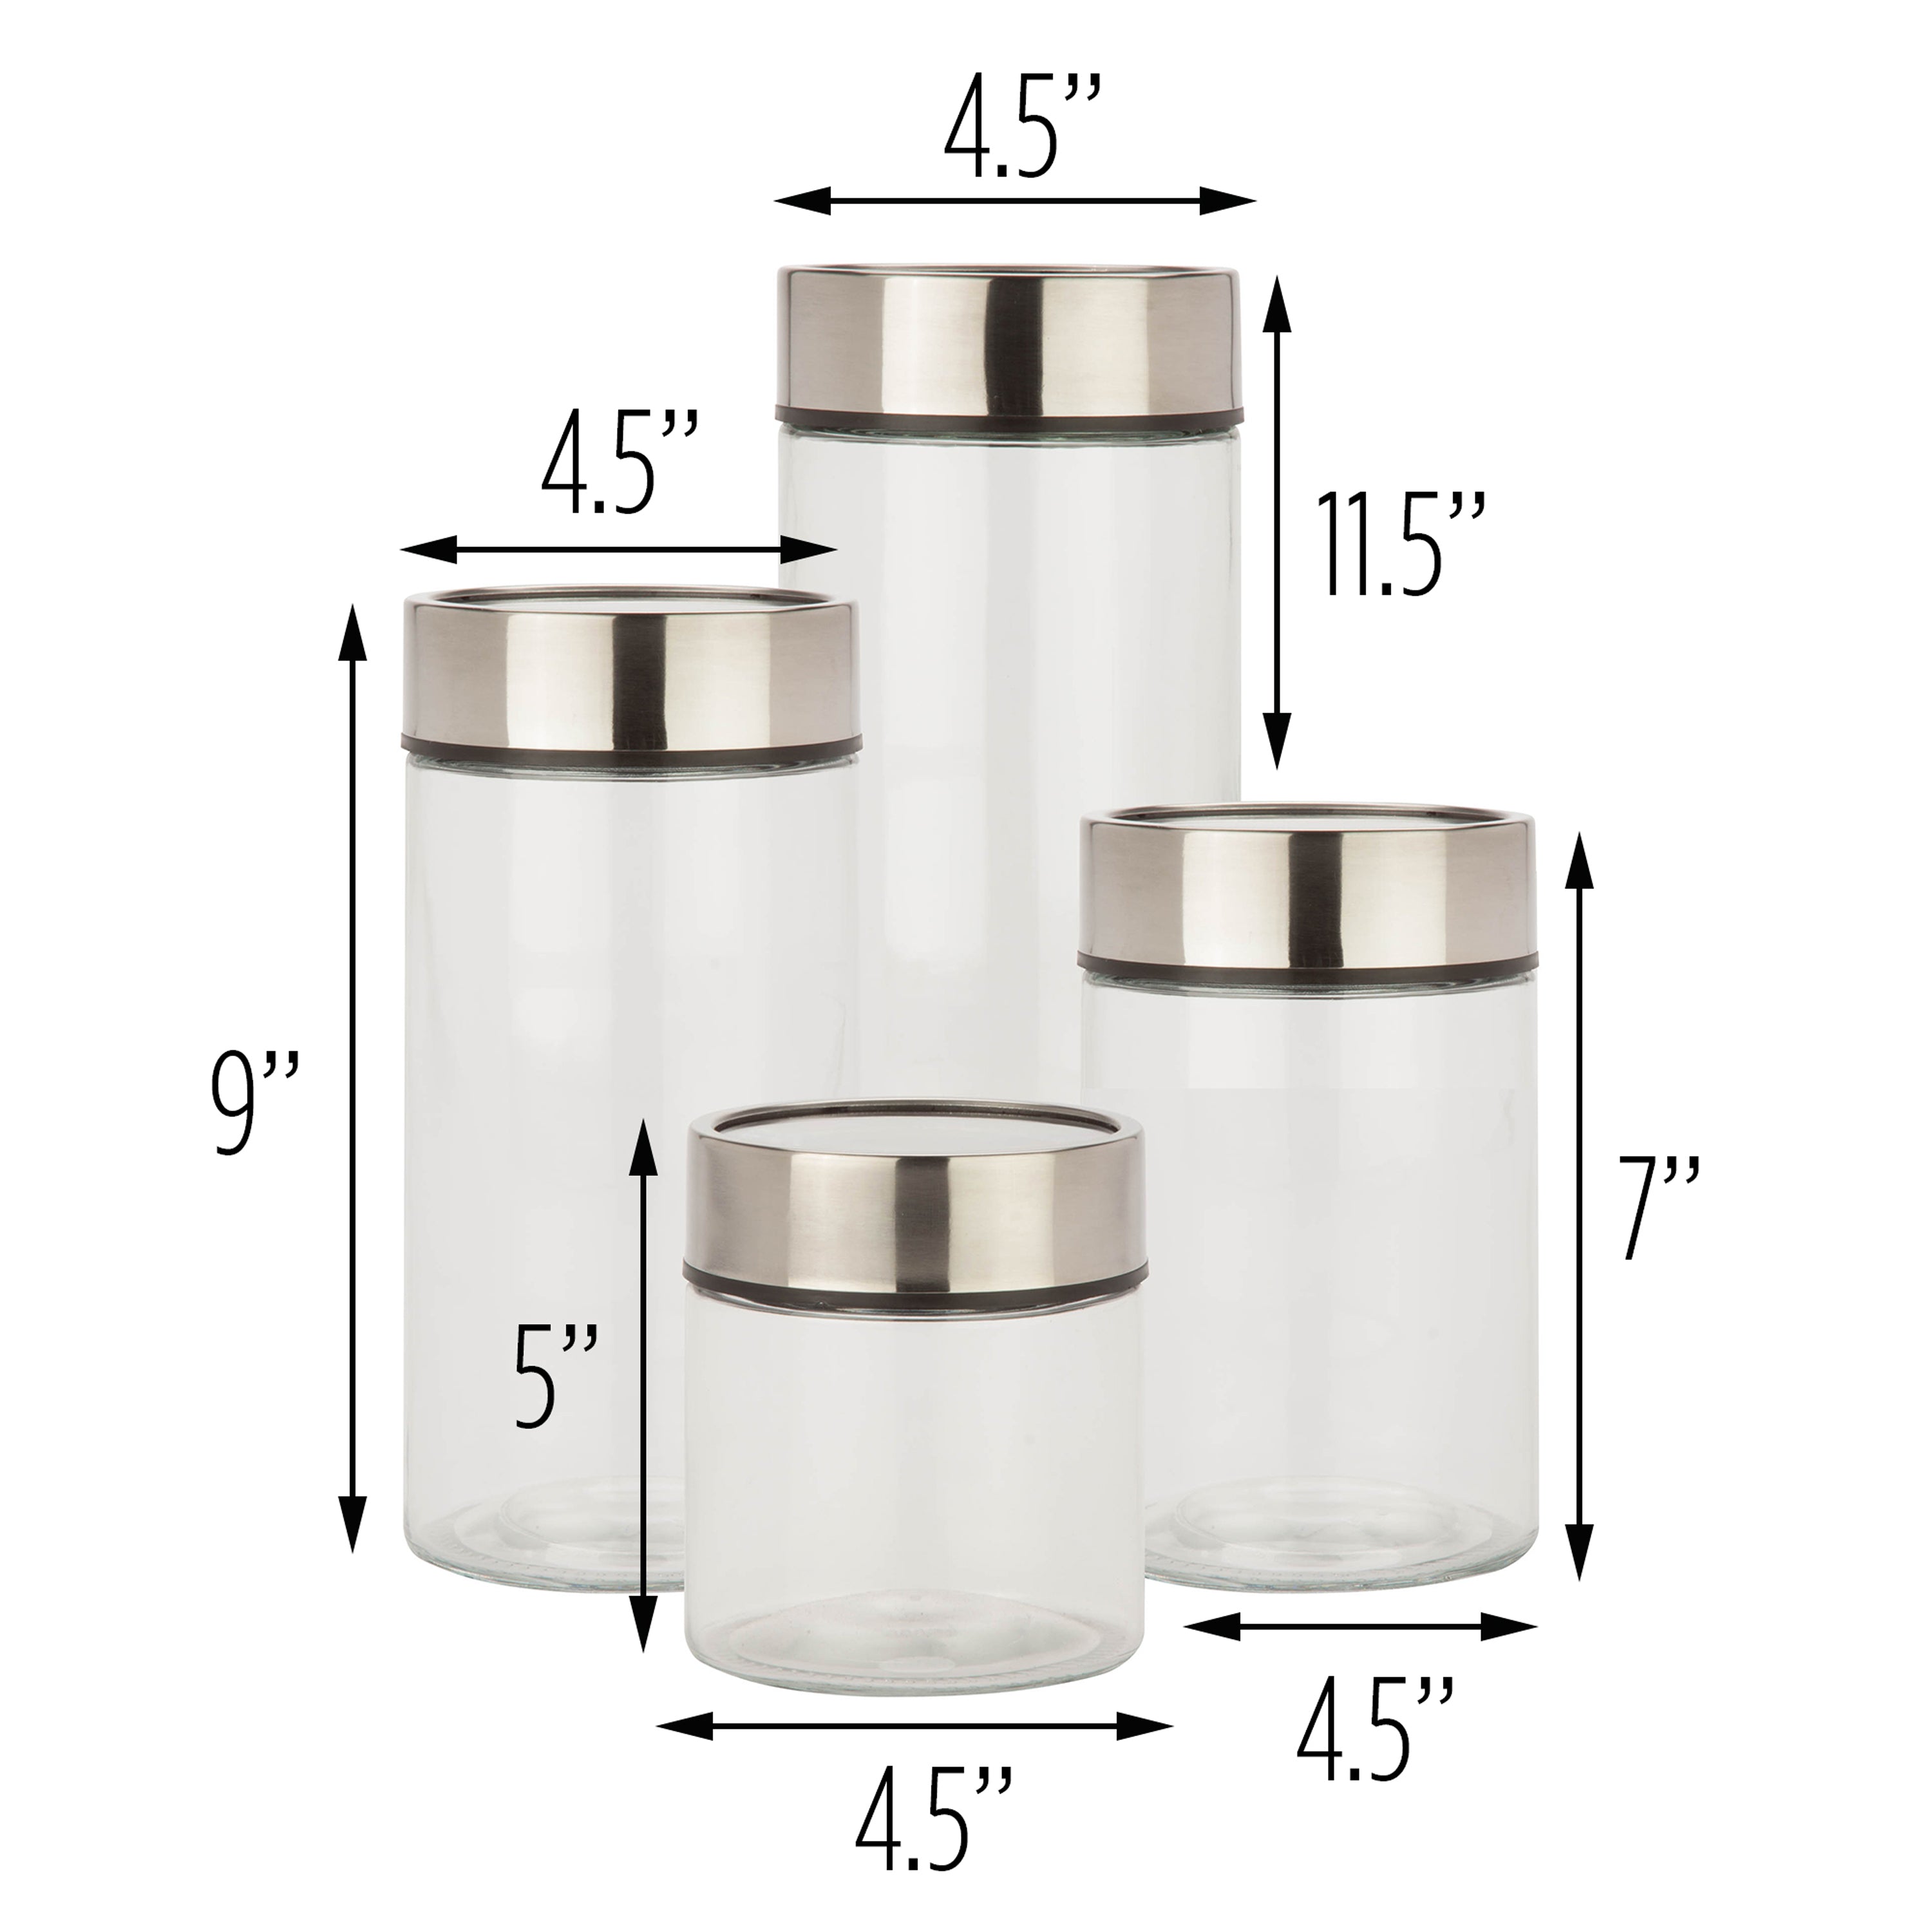 4pc Glass Canisters Set for Kitchen Counter with Airtight Lids